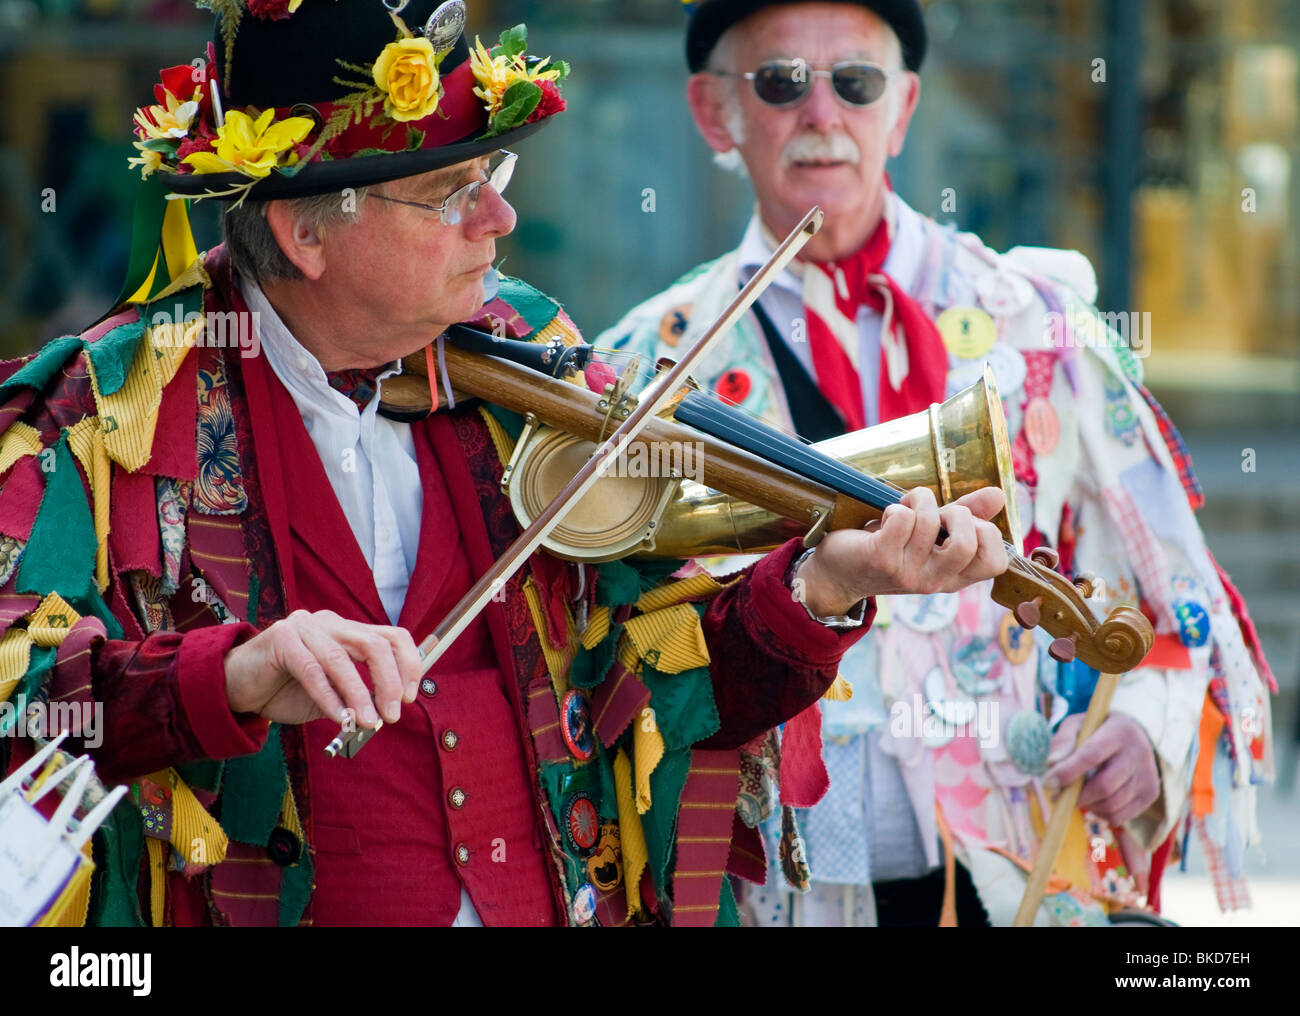 Morris musician playing the Stroh violin, (aka phonofiddle or violinophone) at the Oxford Folk Festival. Stock Photo